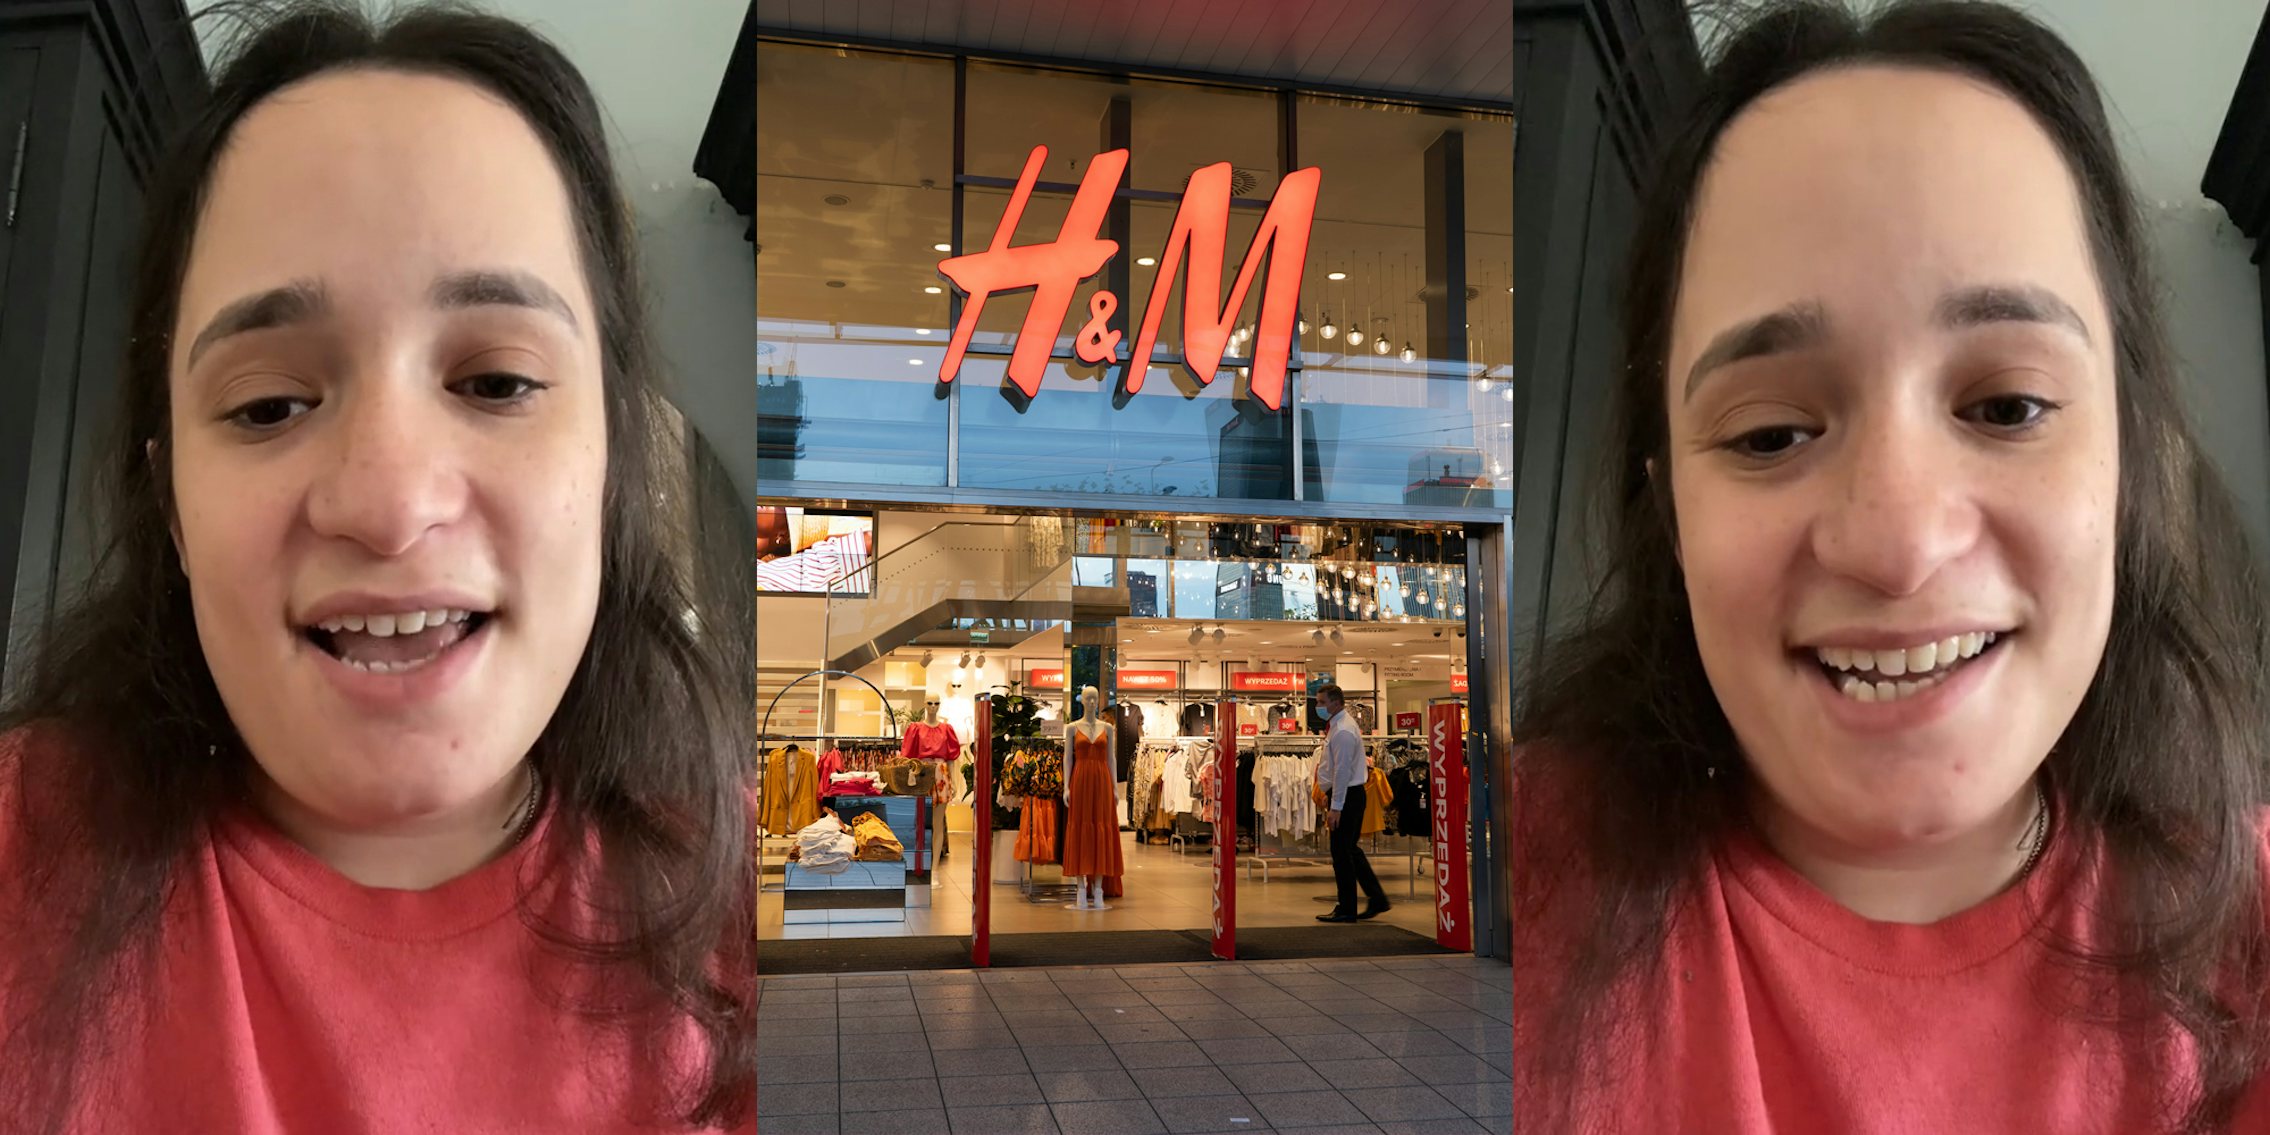 job candidate speaking (l) H&M store with sign (c) job candidate speaking (r)